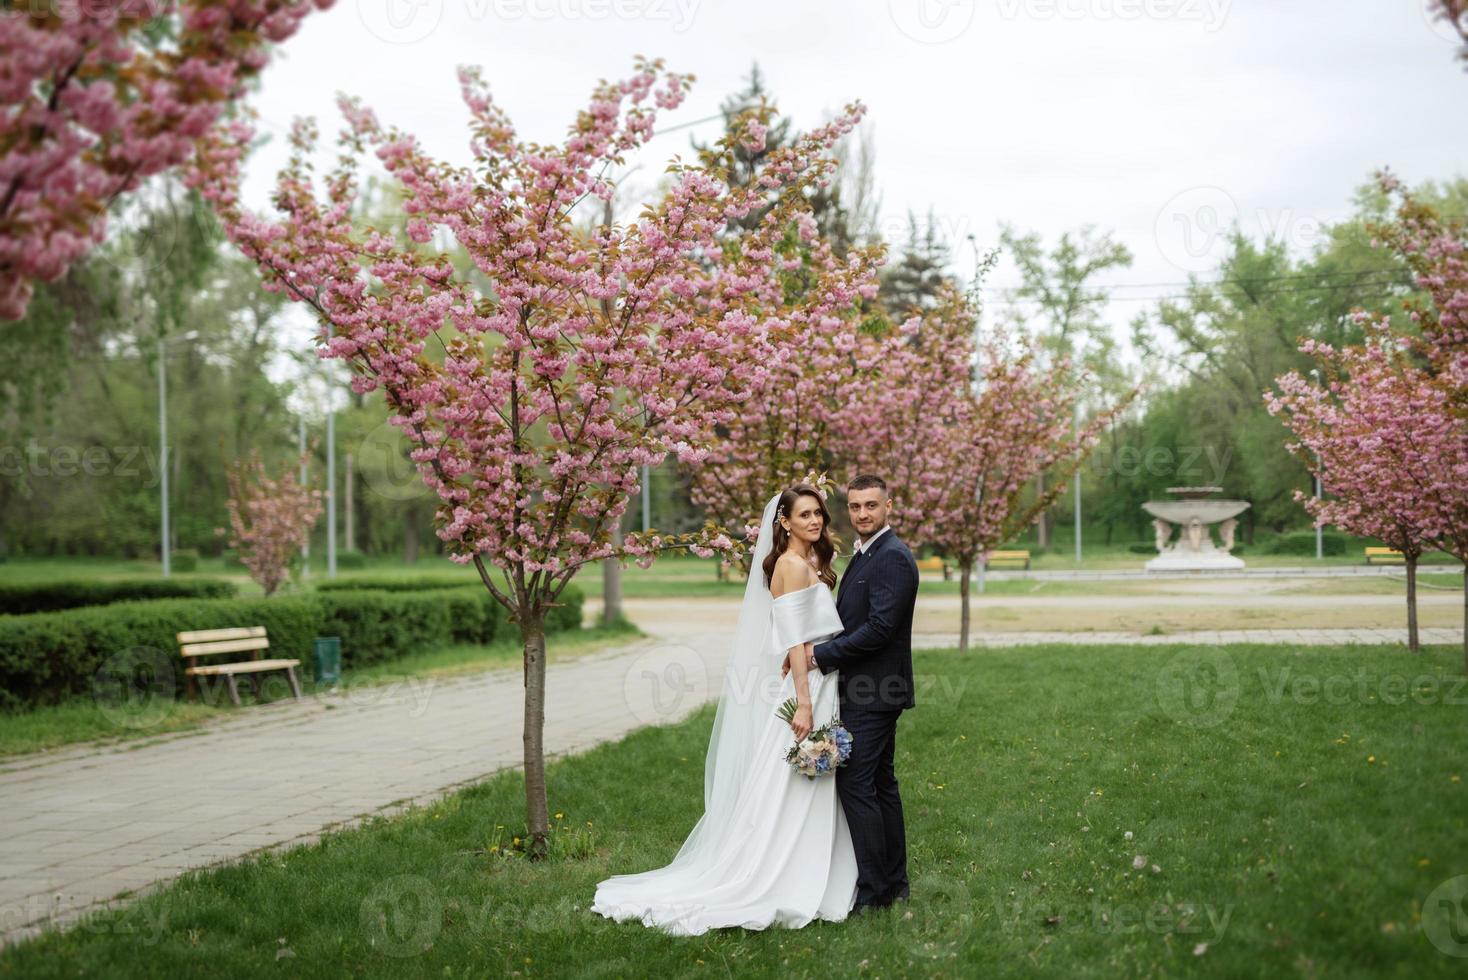 newlyweds walk in the park among cherry blossoms photo